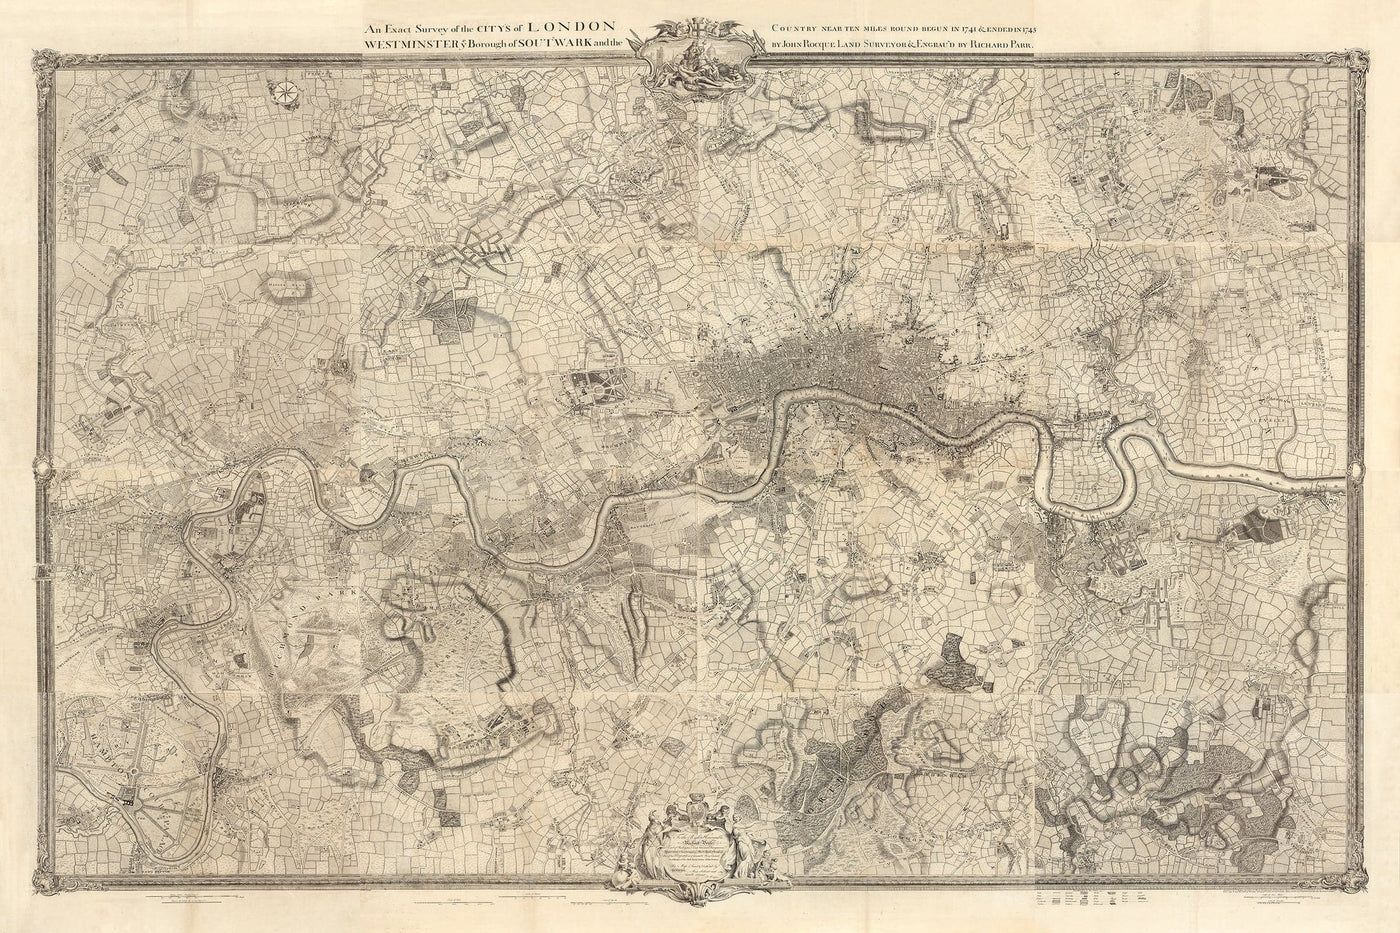 Large Old Map of London - 1746, 1788, 1830 or 1862. Big custom map up to 4 metres (13ft)